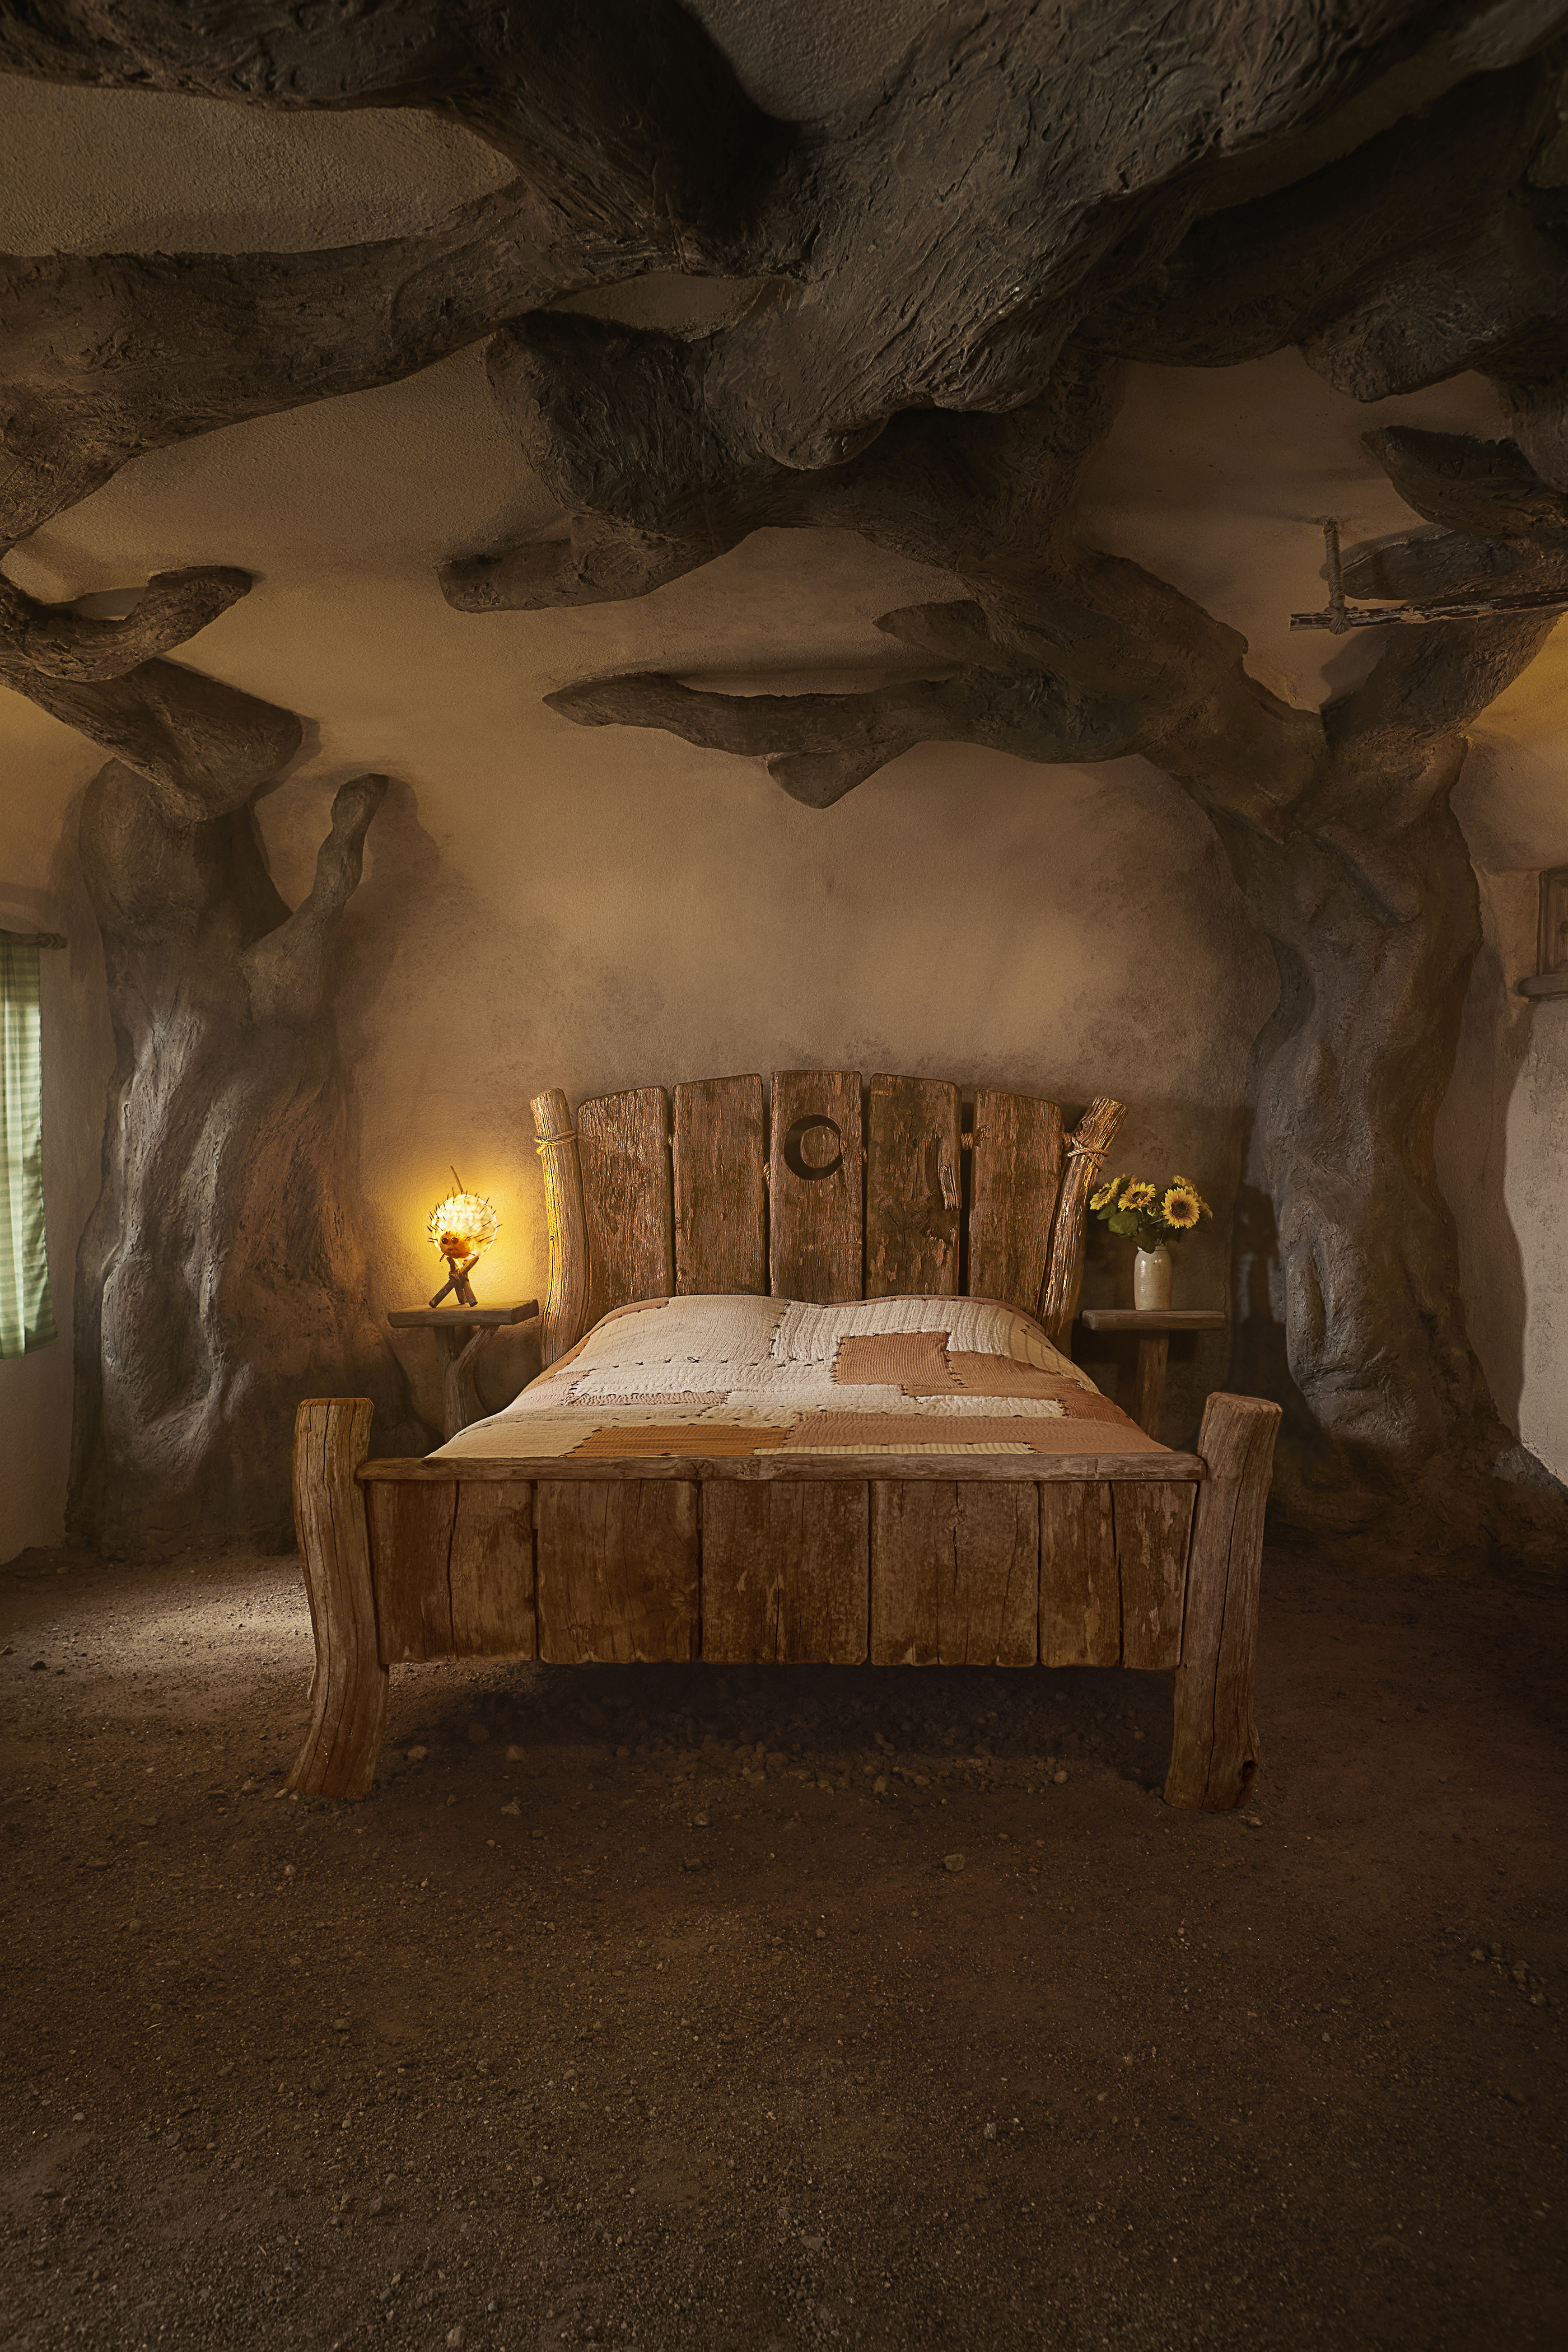 Bedroom in Shrek's Swamp, a wooden bed with small bedside tables on either side